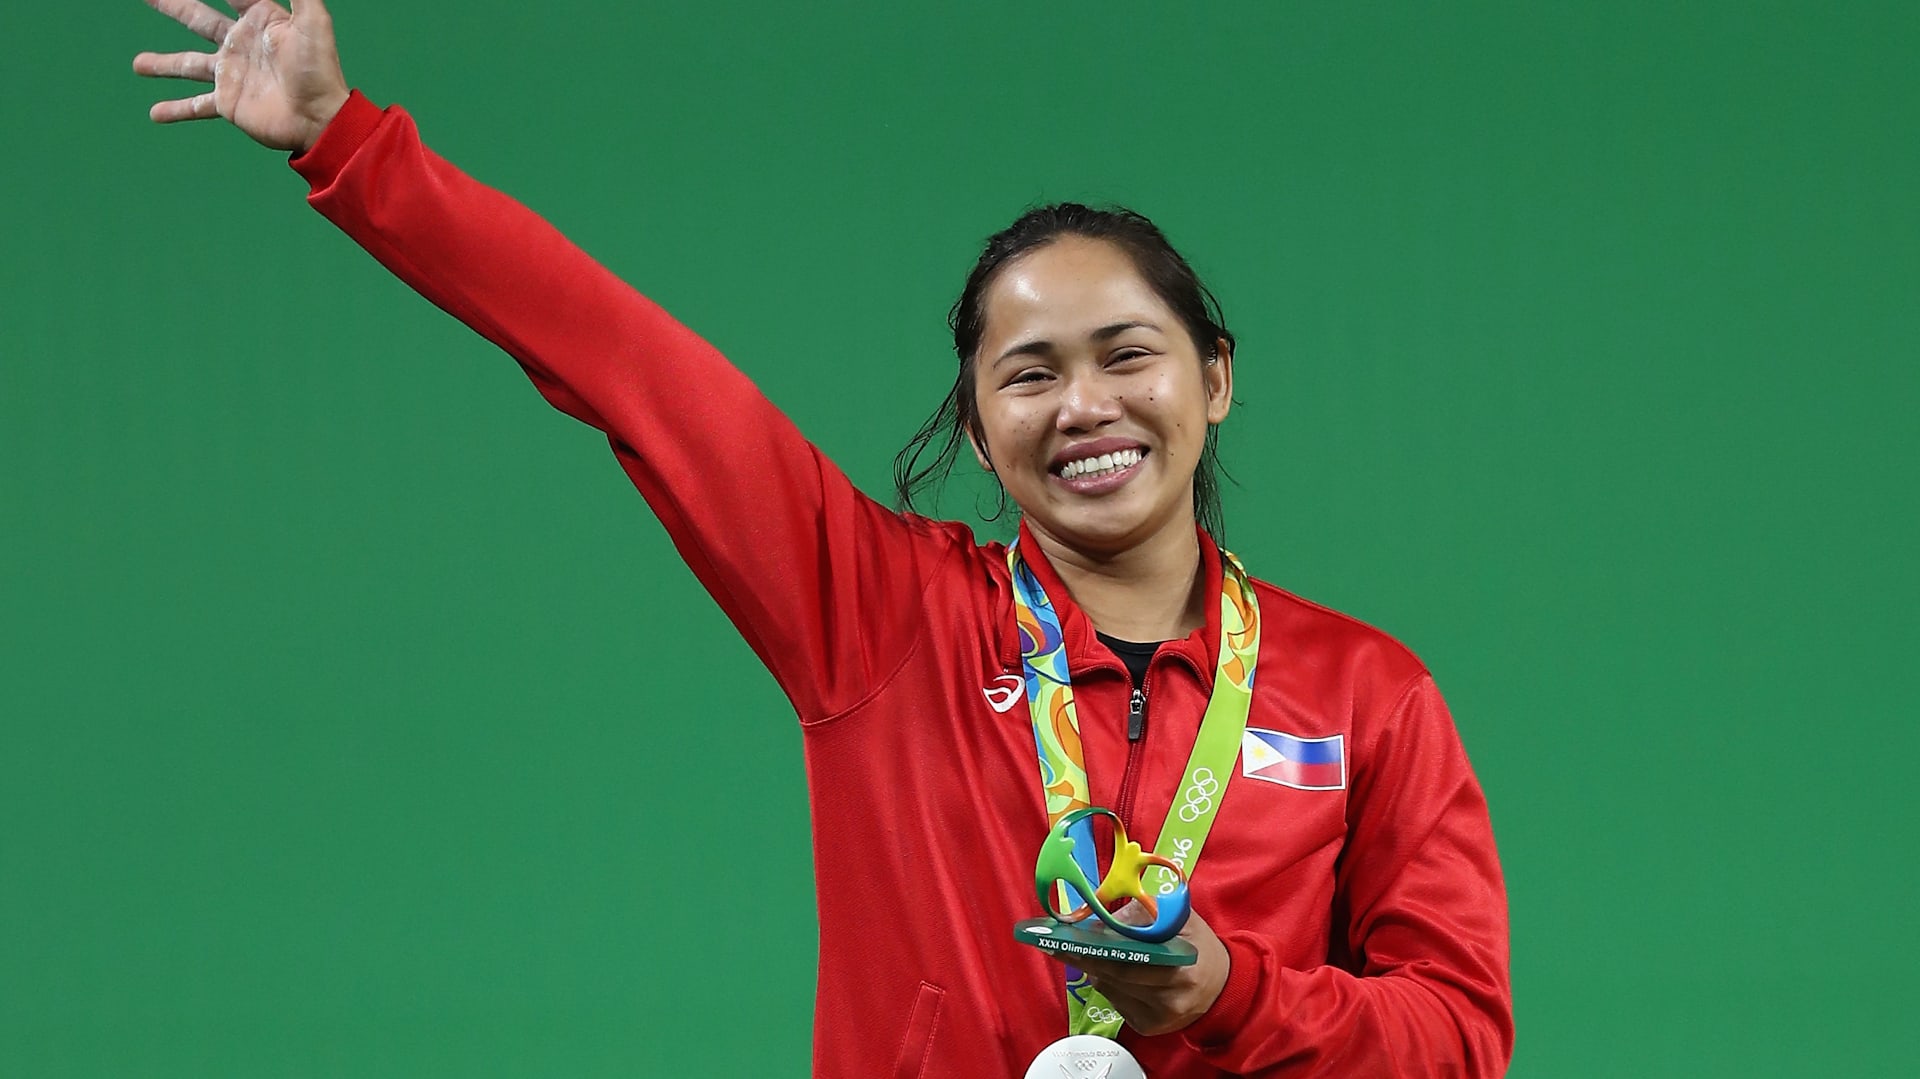 Hidilyn Diazs mission win Olympic gold for the Philippines at Tokyo 2020 pic